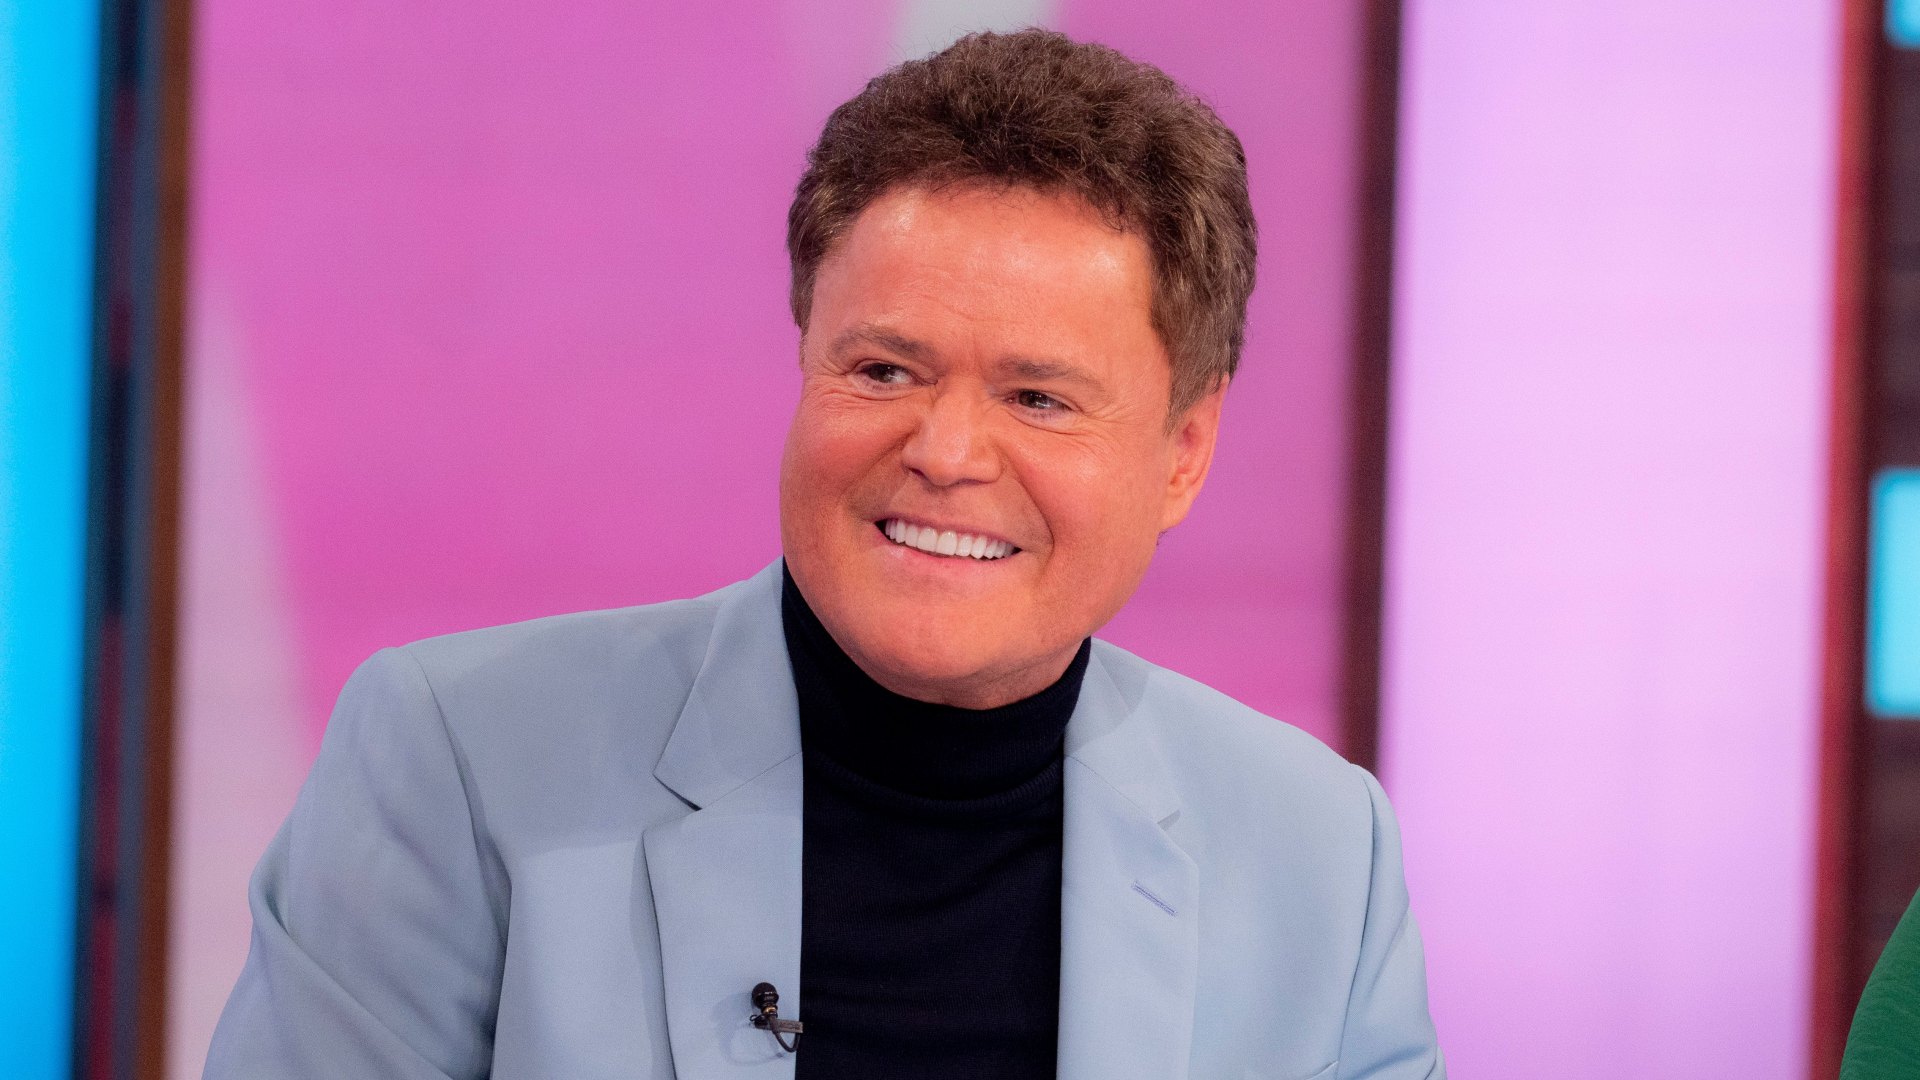 Donny Osmond Net Worth How Much Money He Makes